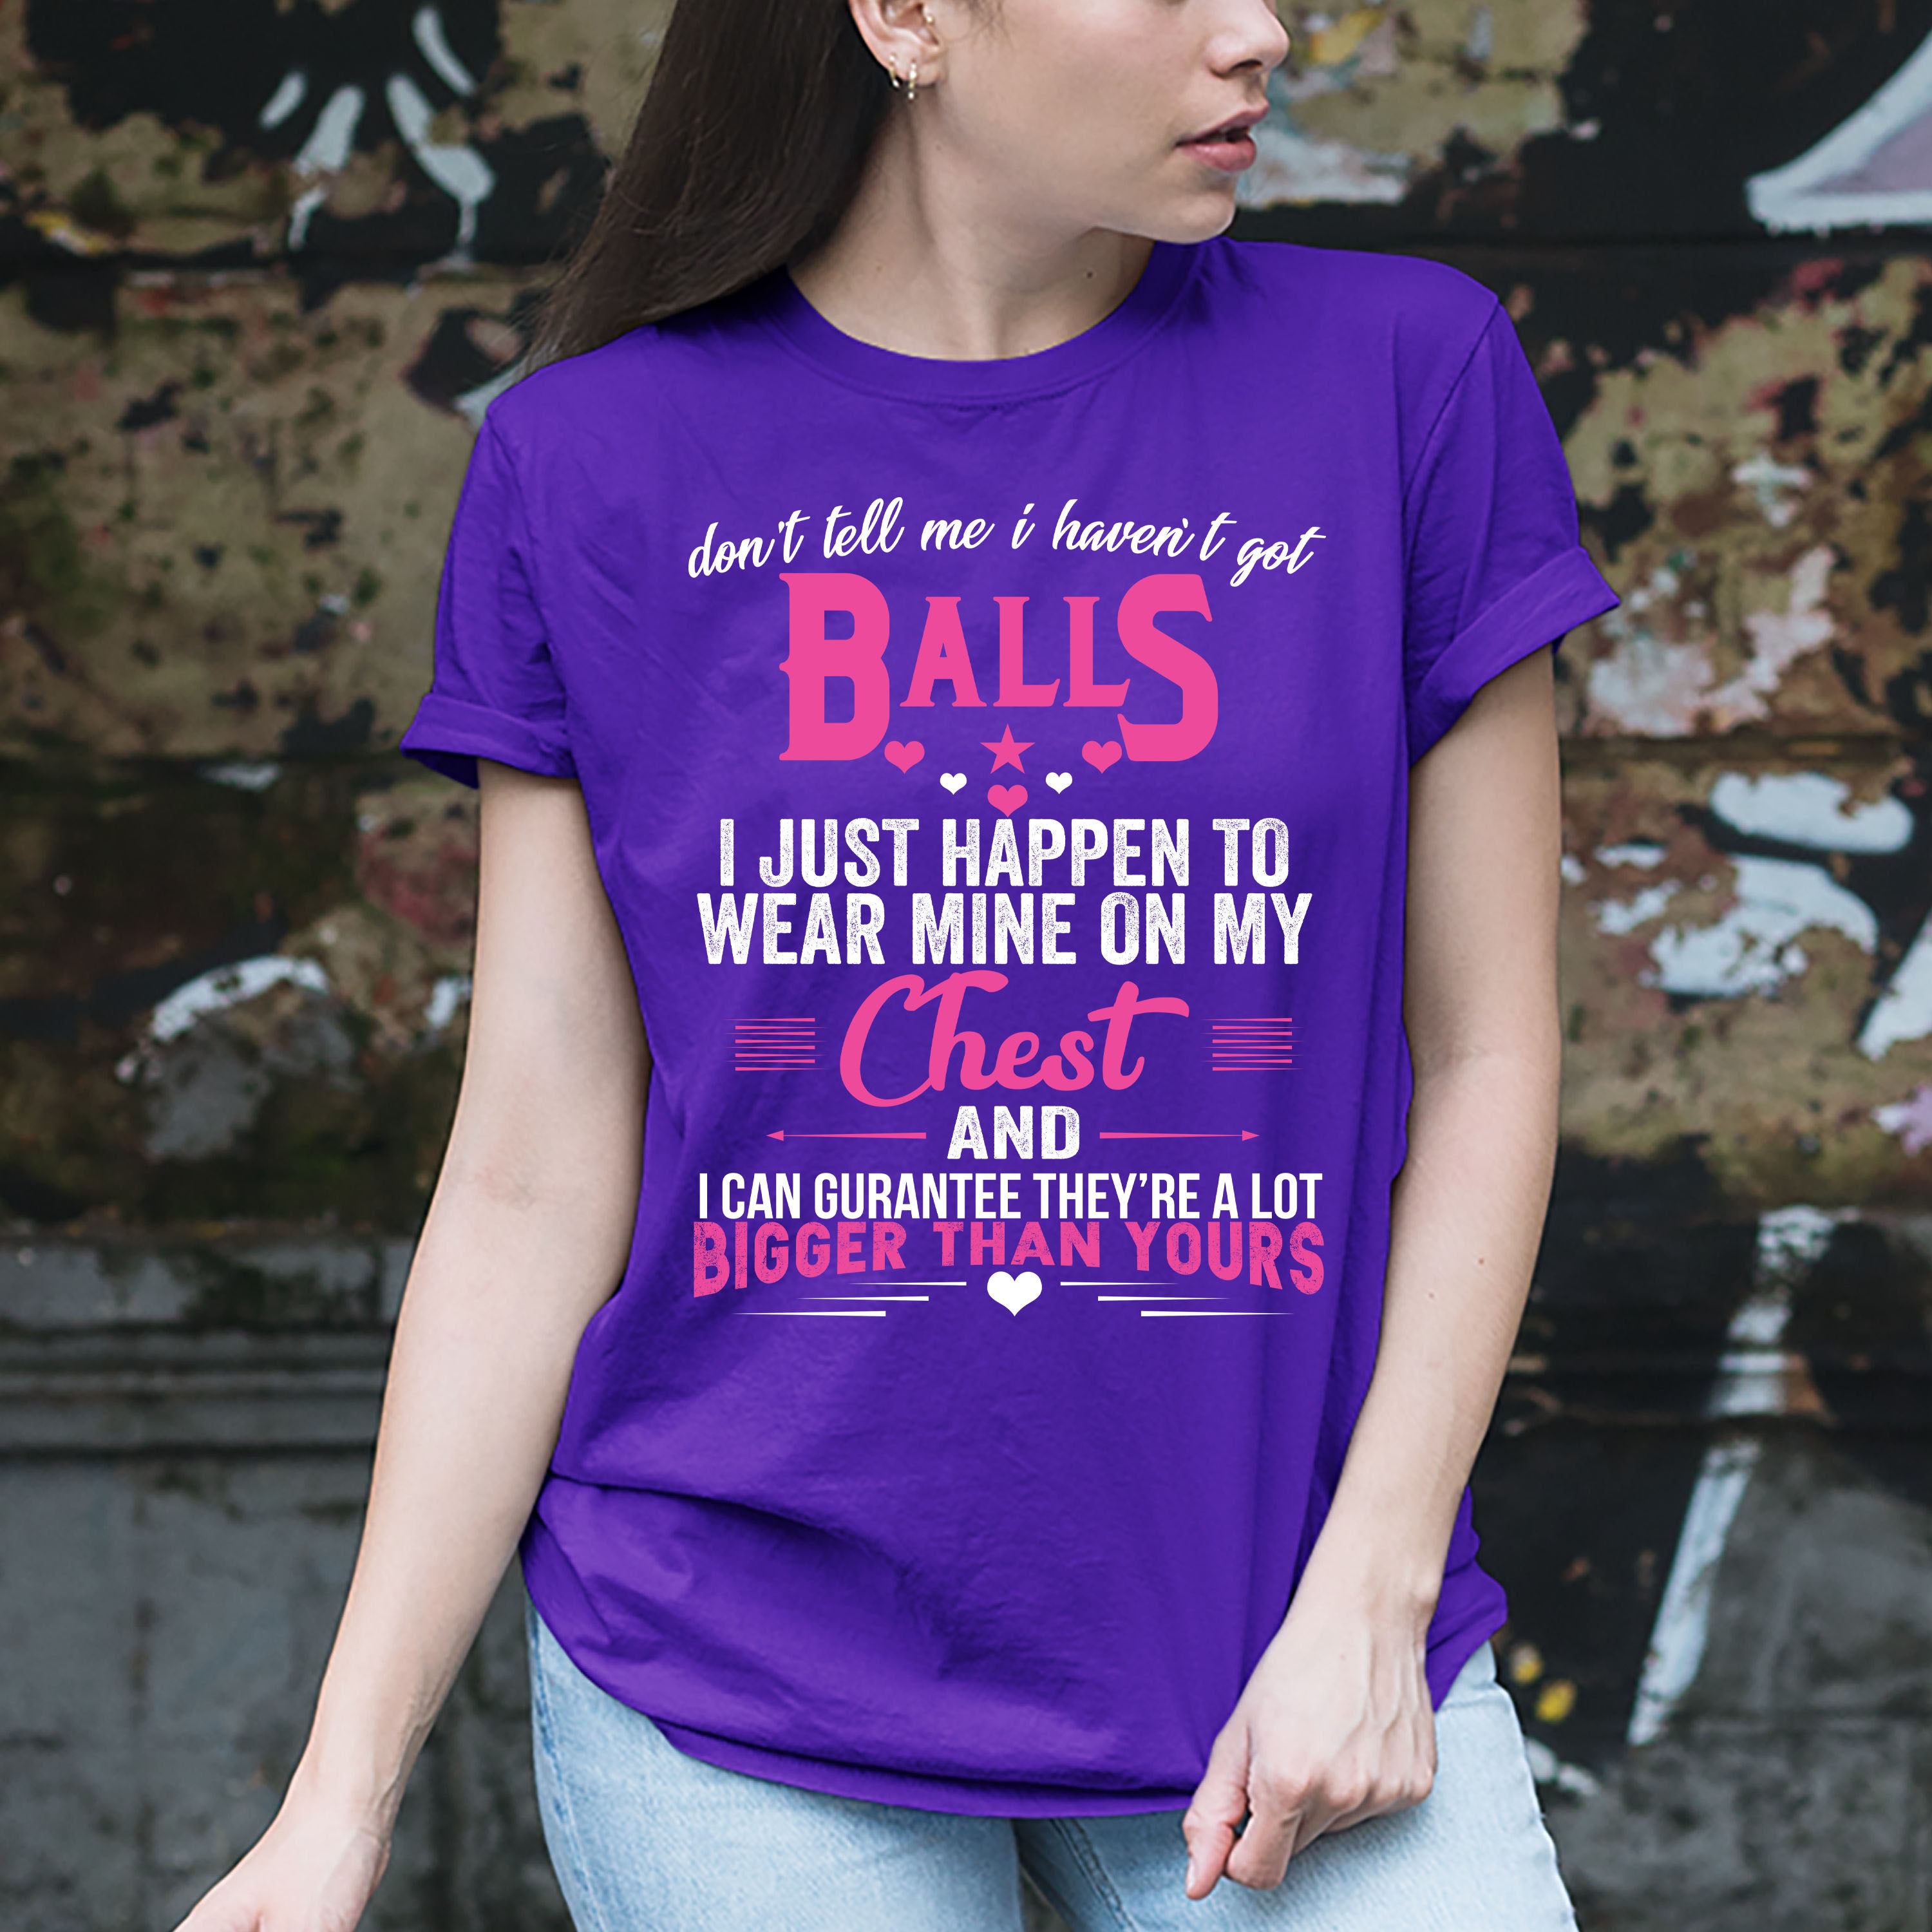 "Don't Tell Me I haven't Got Balls I Just Happen To Wear Mine On My Chest"